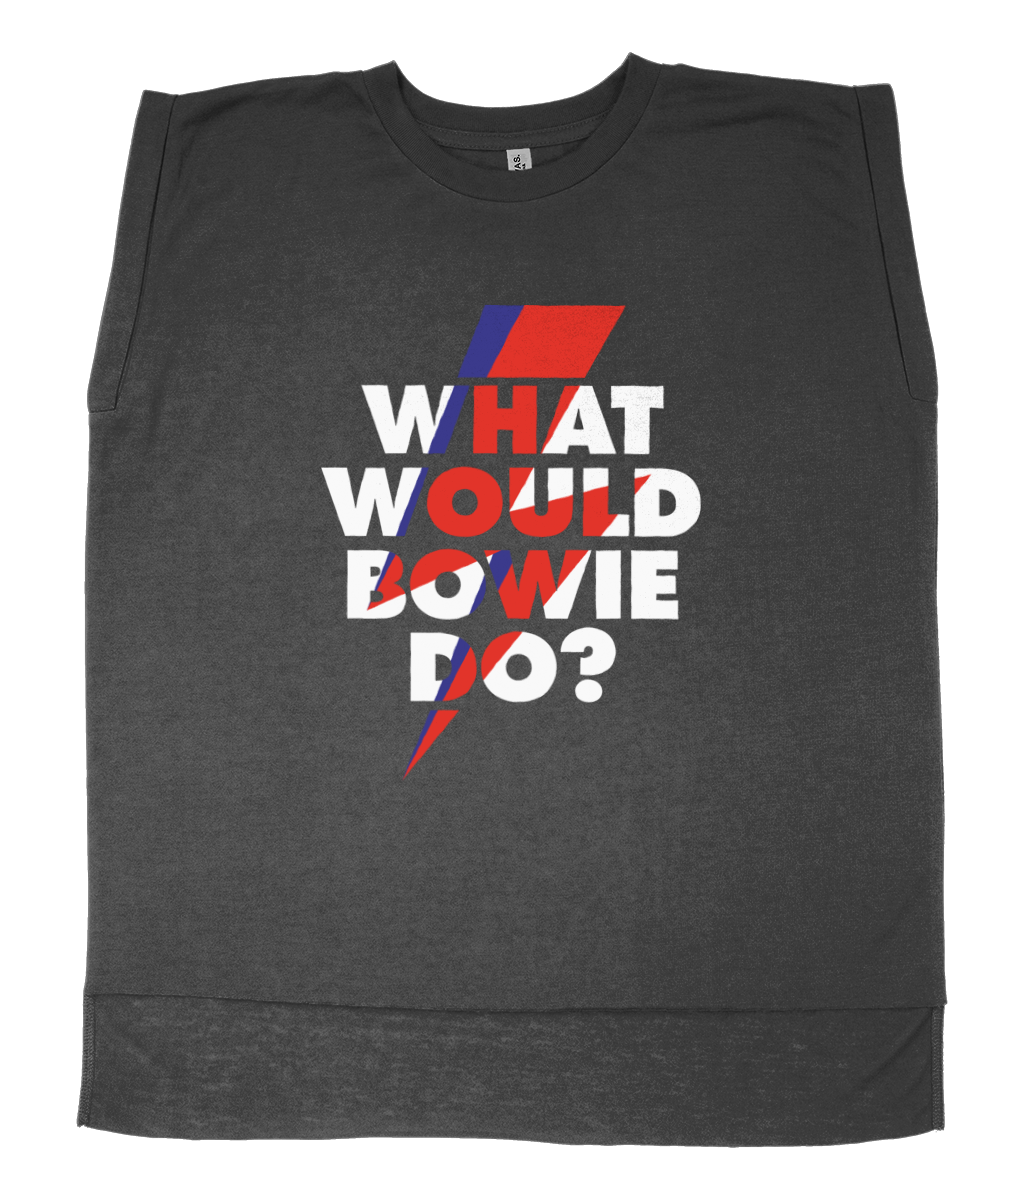 Express your unique personality and channel your inner Bowie with this Women's Vest Top